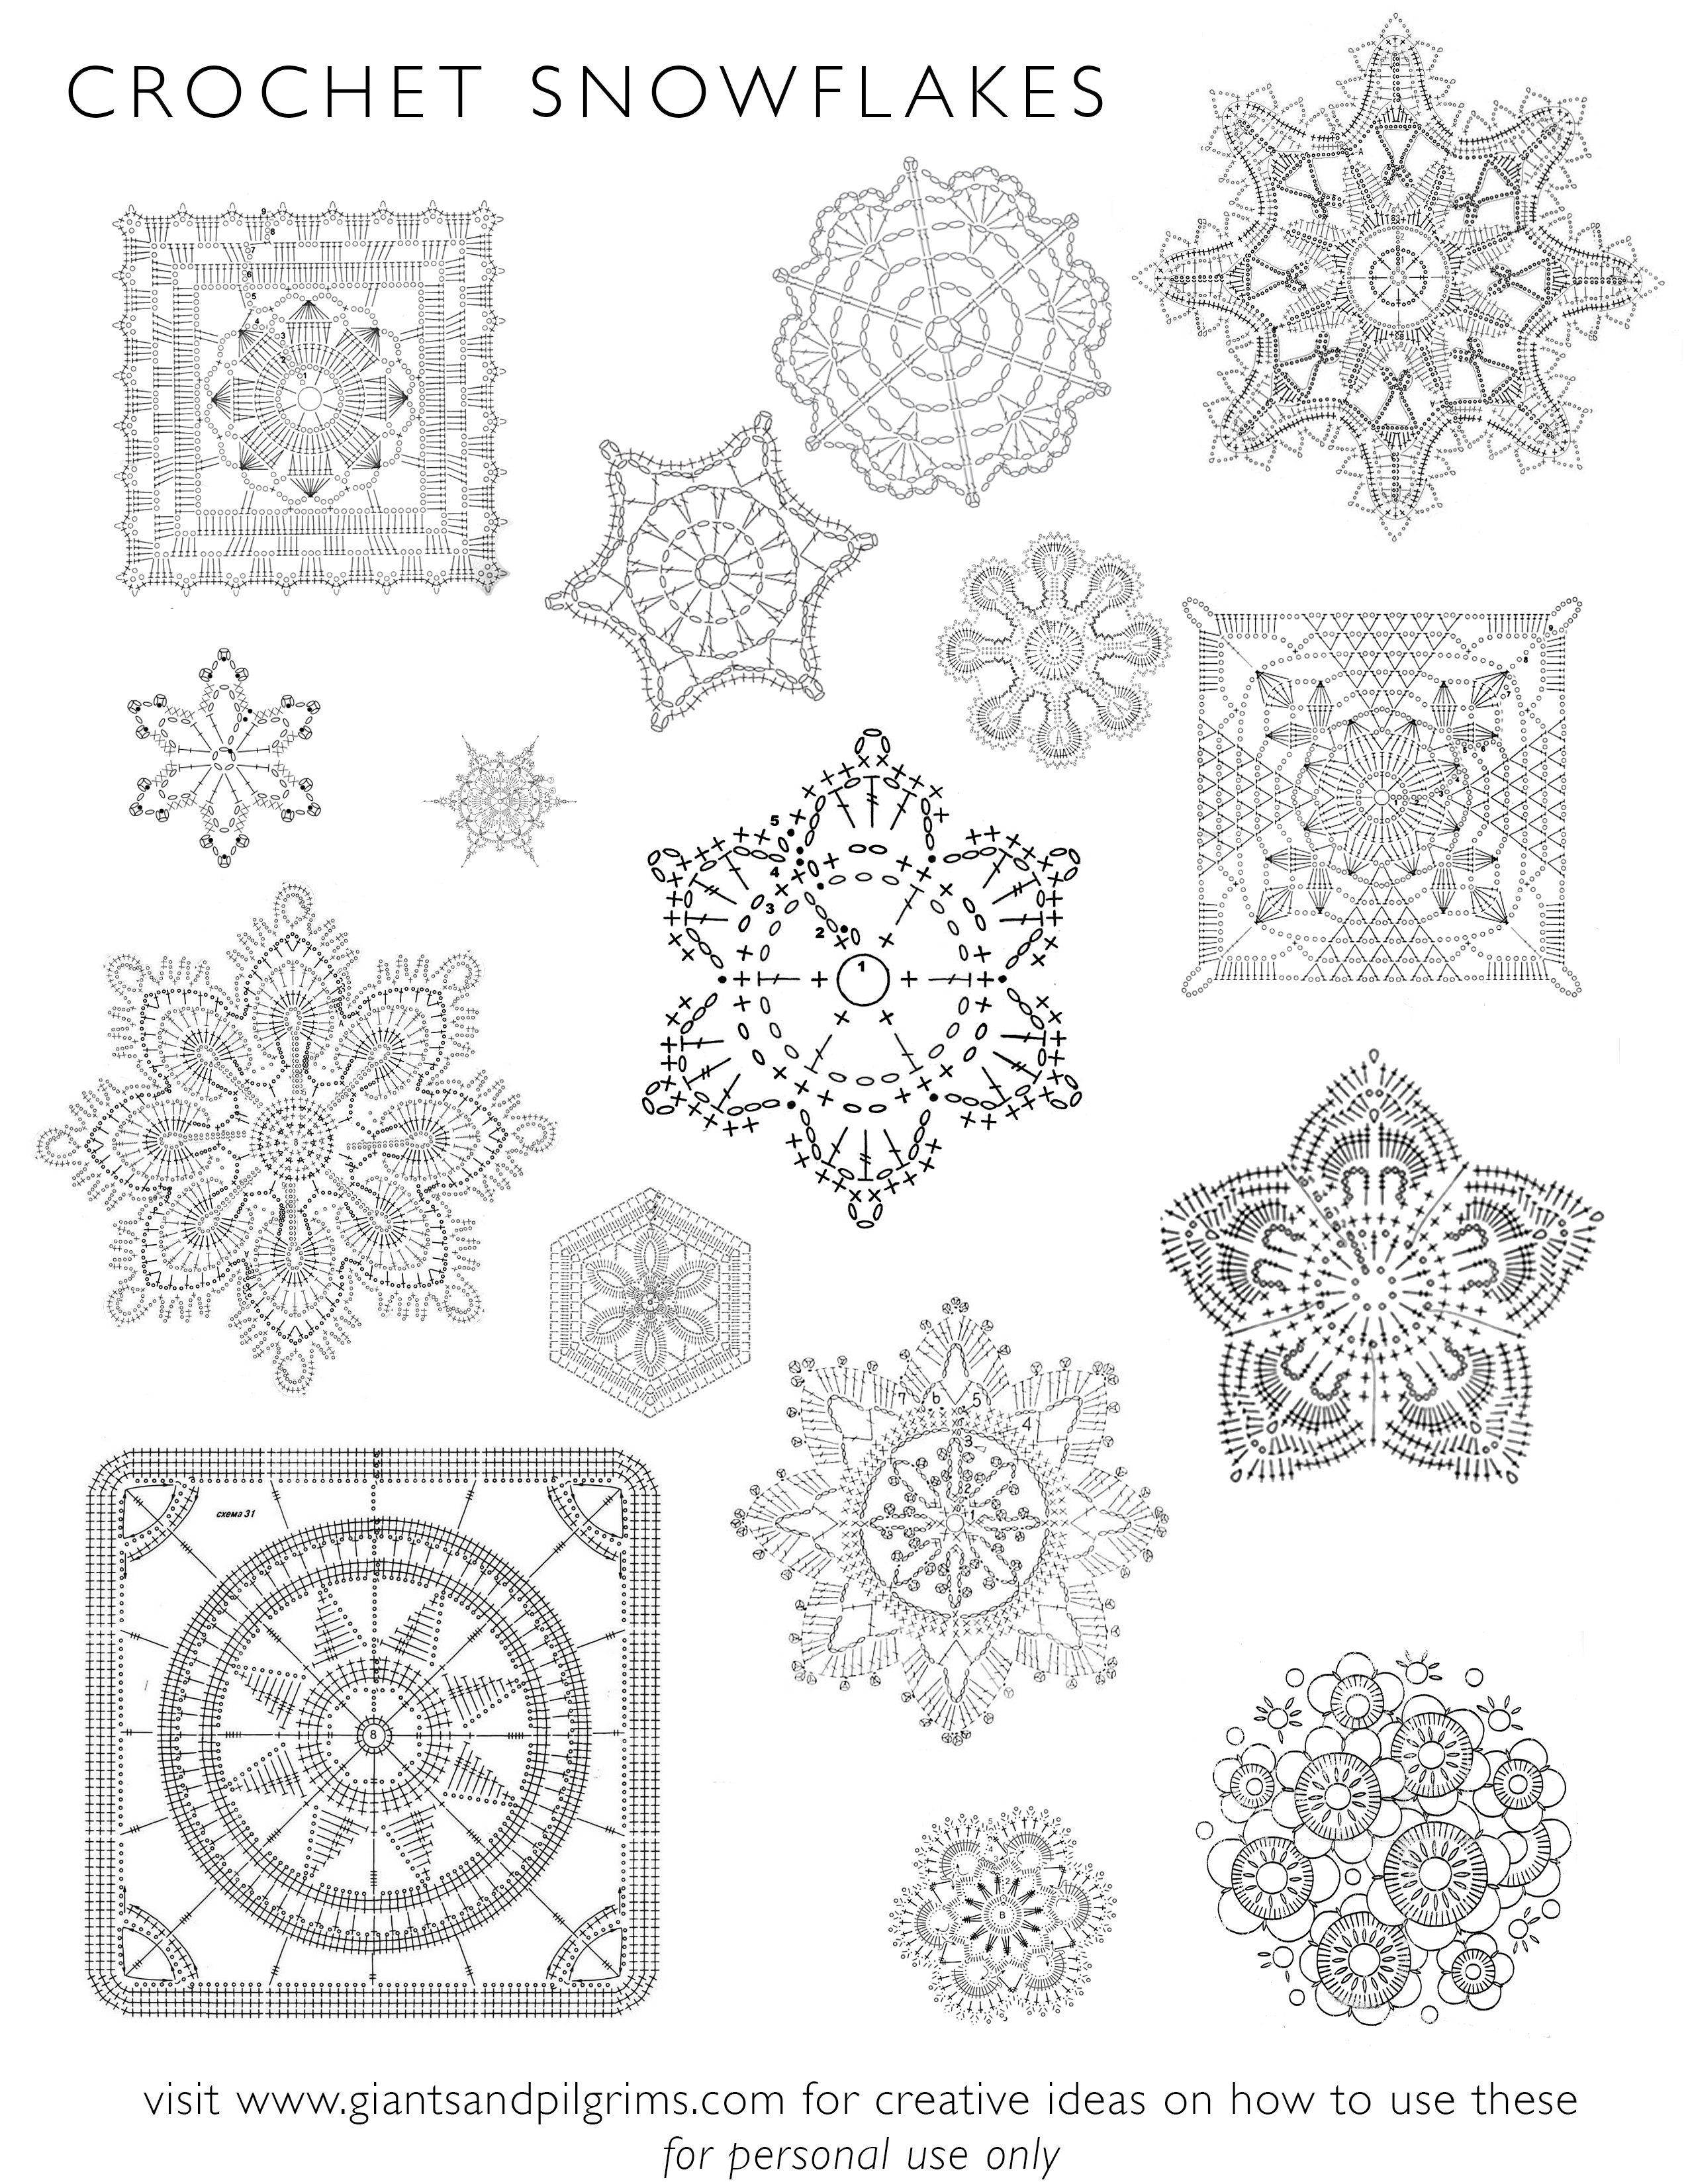 Snowflake Crochet Pattern How To Crochet Snowflake Patterns 33 Amazing Diy Patterns For You